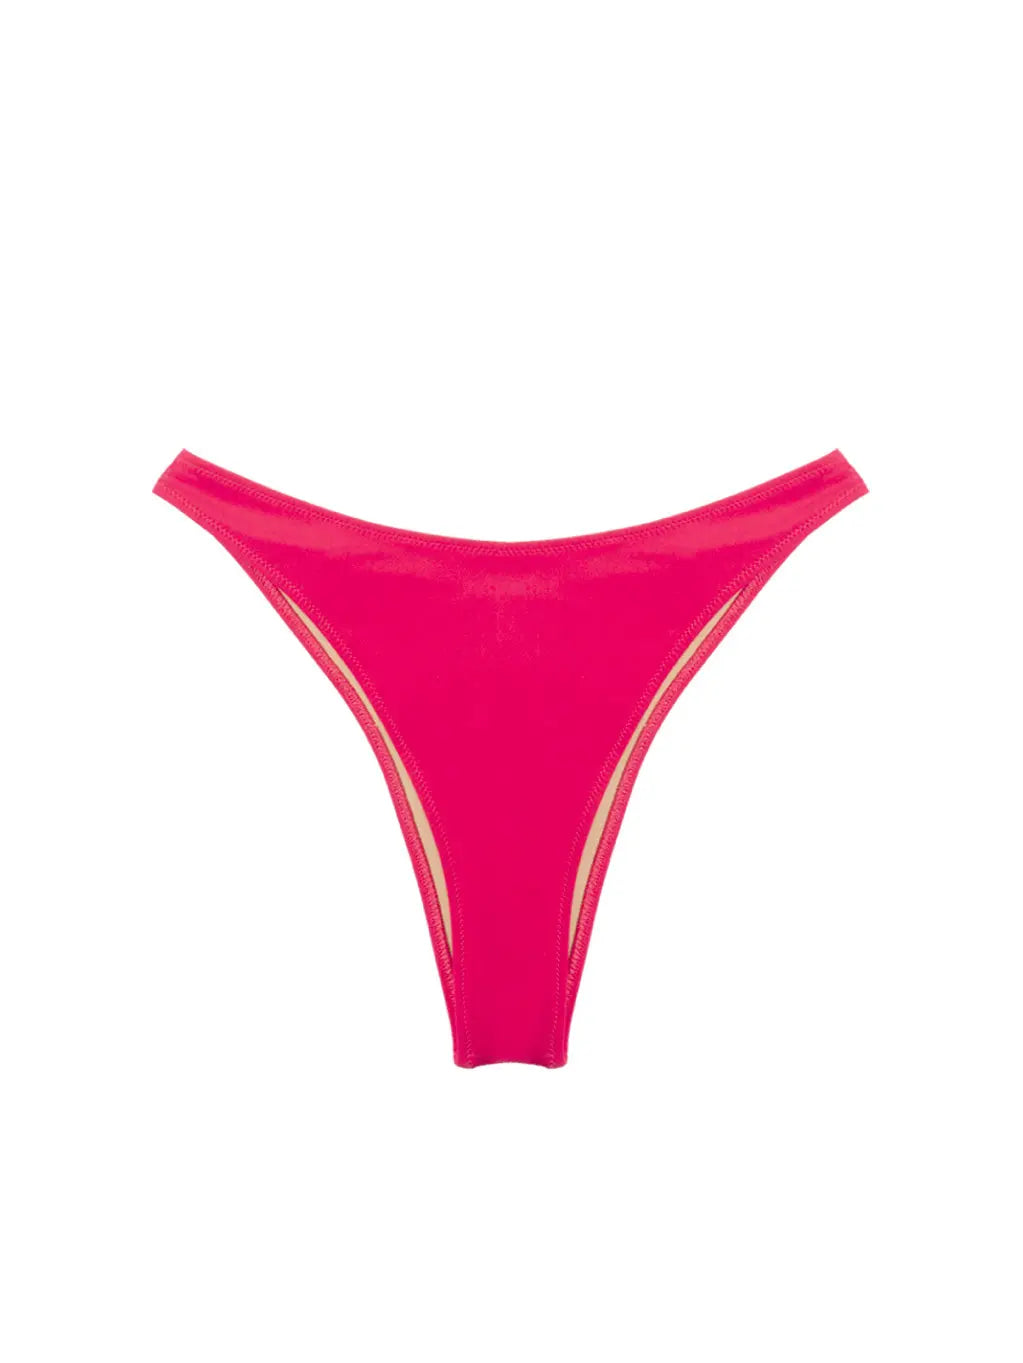 A pair of **_Trentotto Magenta Bikini Bottom_** from **_Lido_** lay flat against a white background. The design is simple and minimalistic, featuring high-cut legs and a thin waistband. Perfect for your next beach trip to Barcelona.